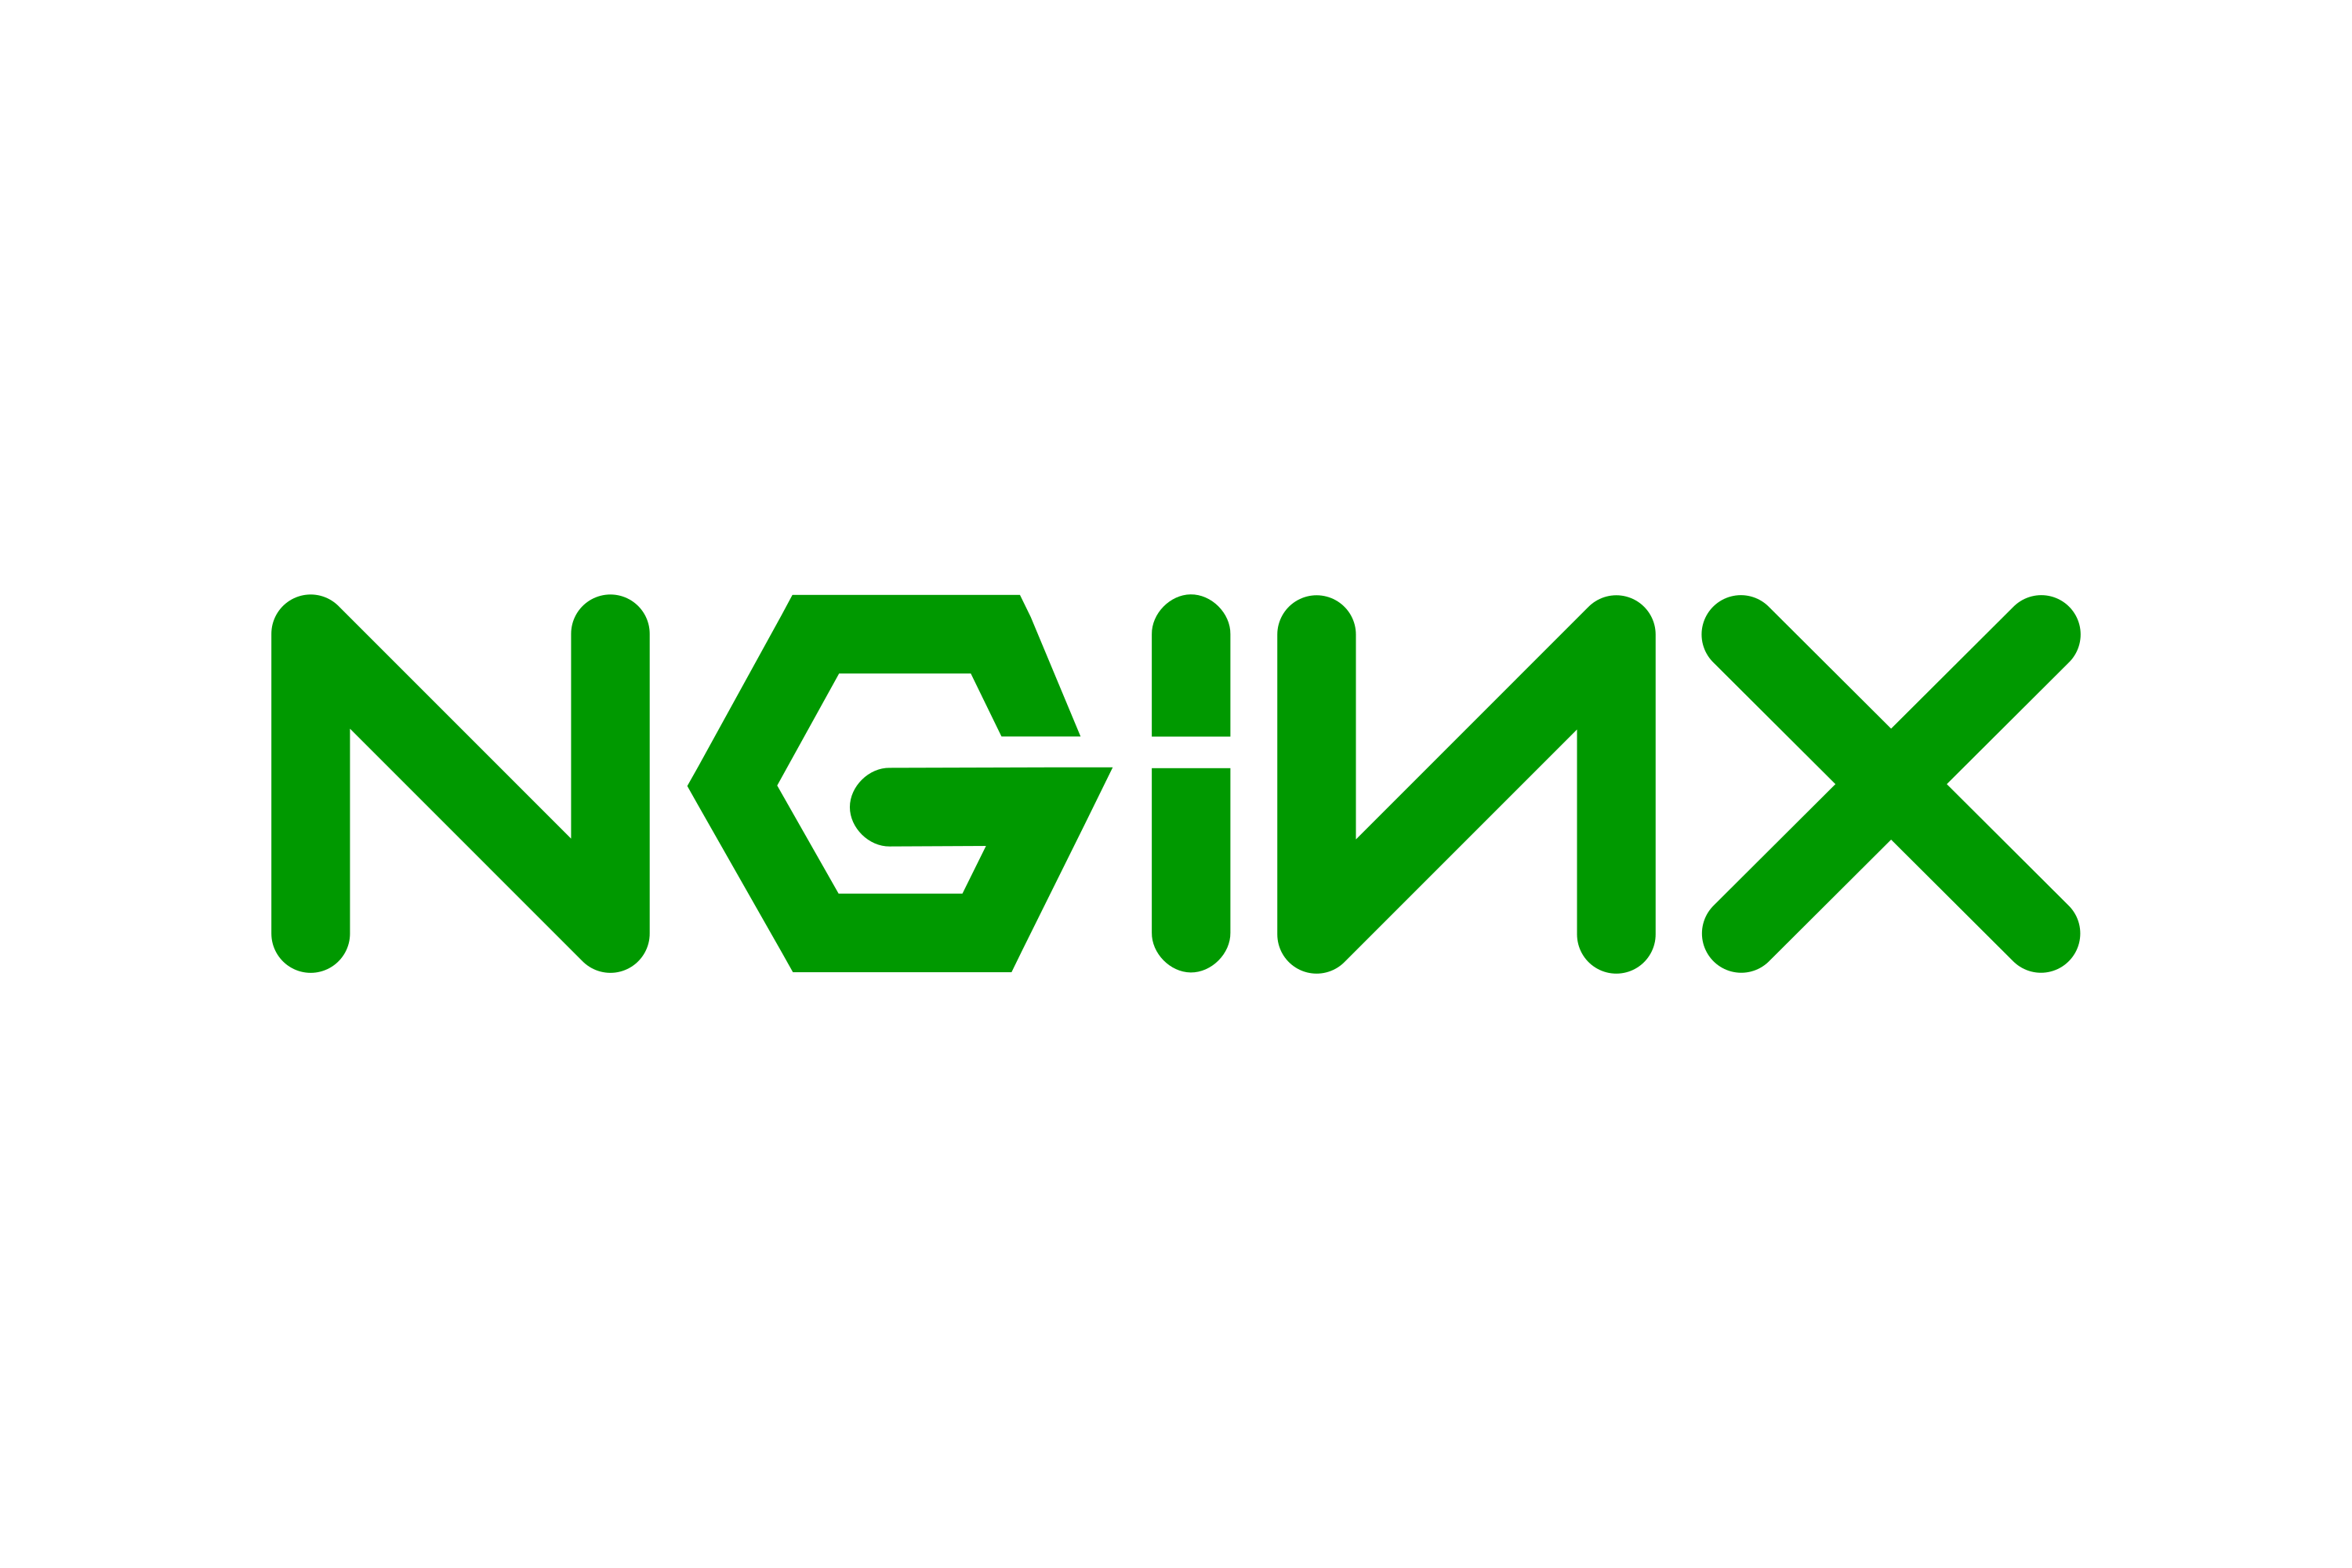 [ Powered by nginx ]